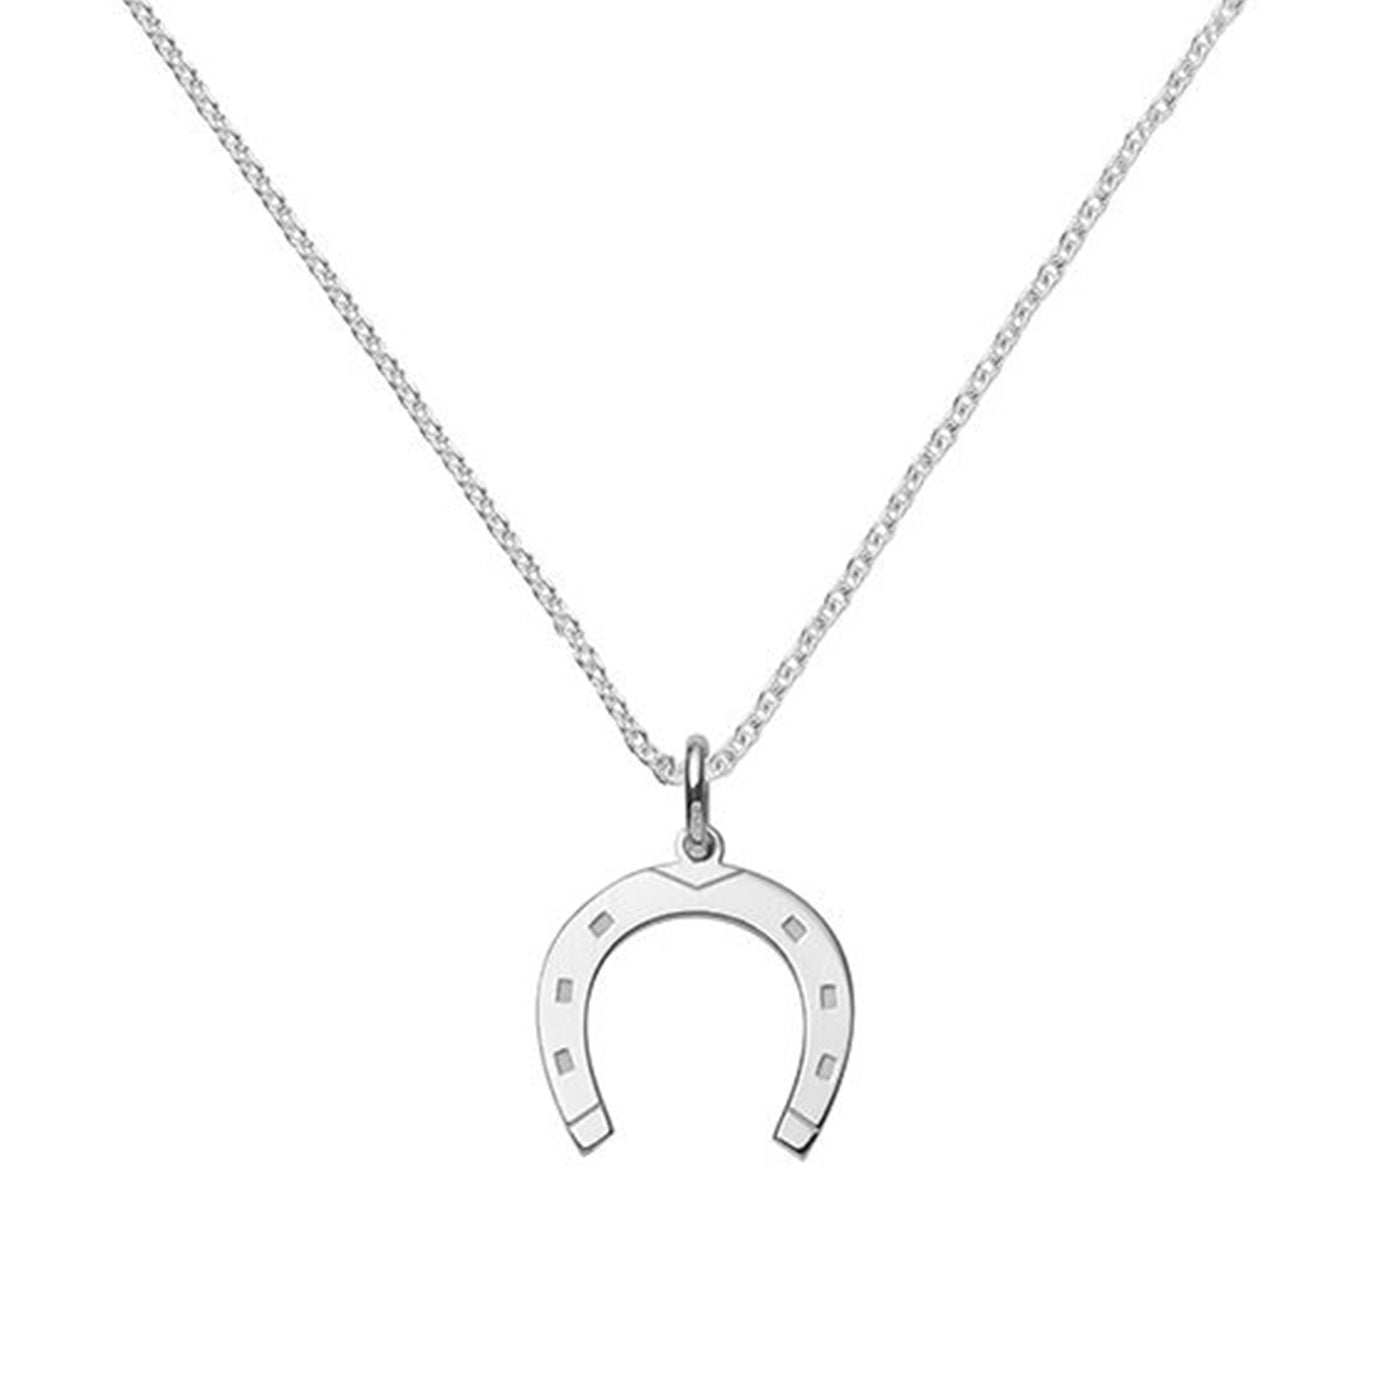 Lucky Sterling Silver Horseshoe Necklace | Hersey & Son Silversmiths